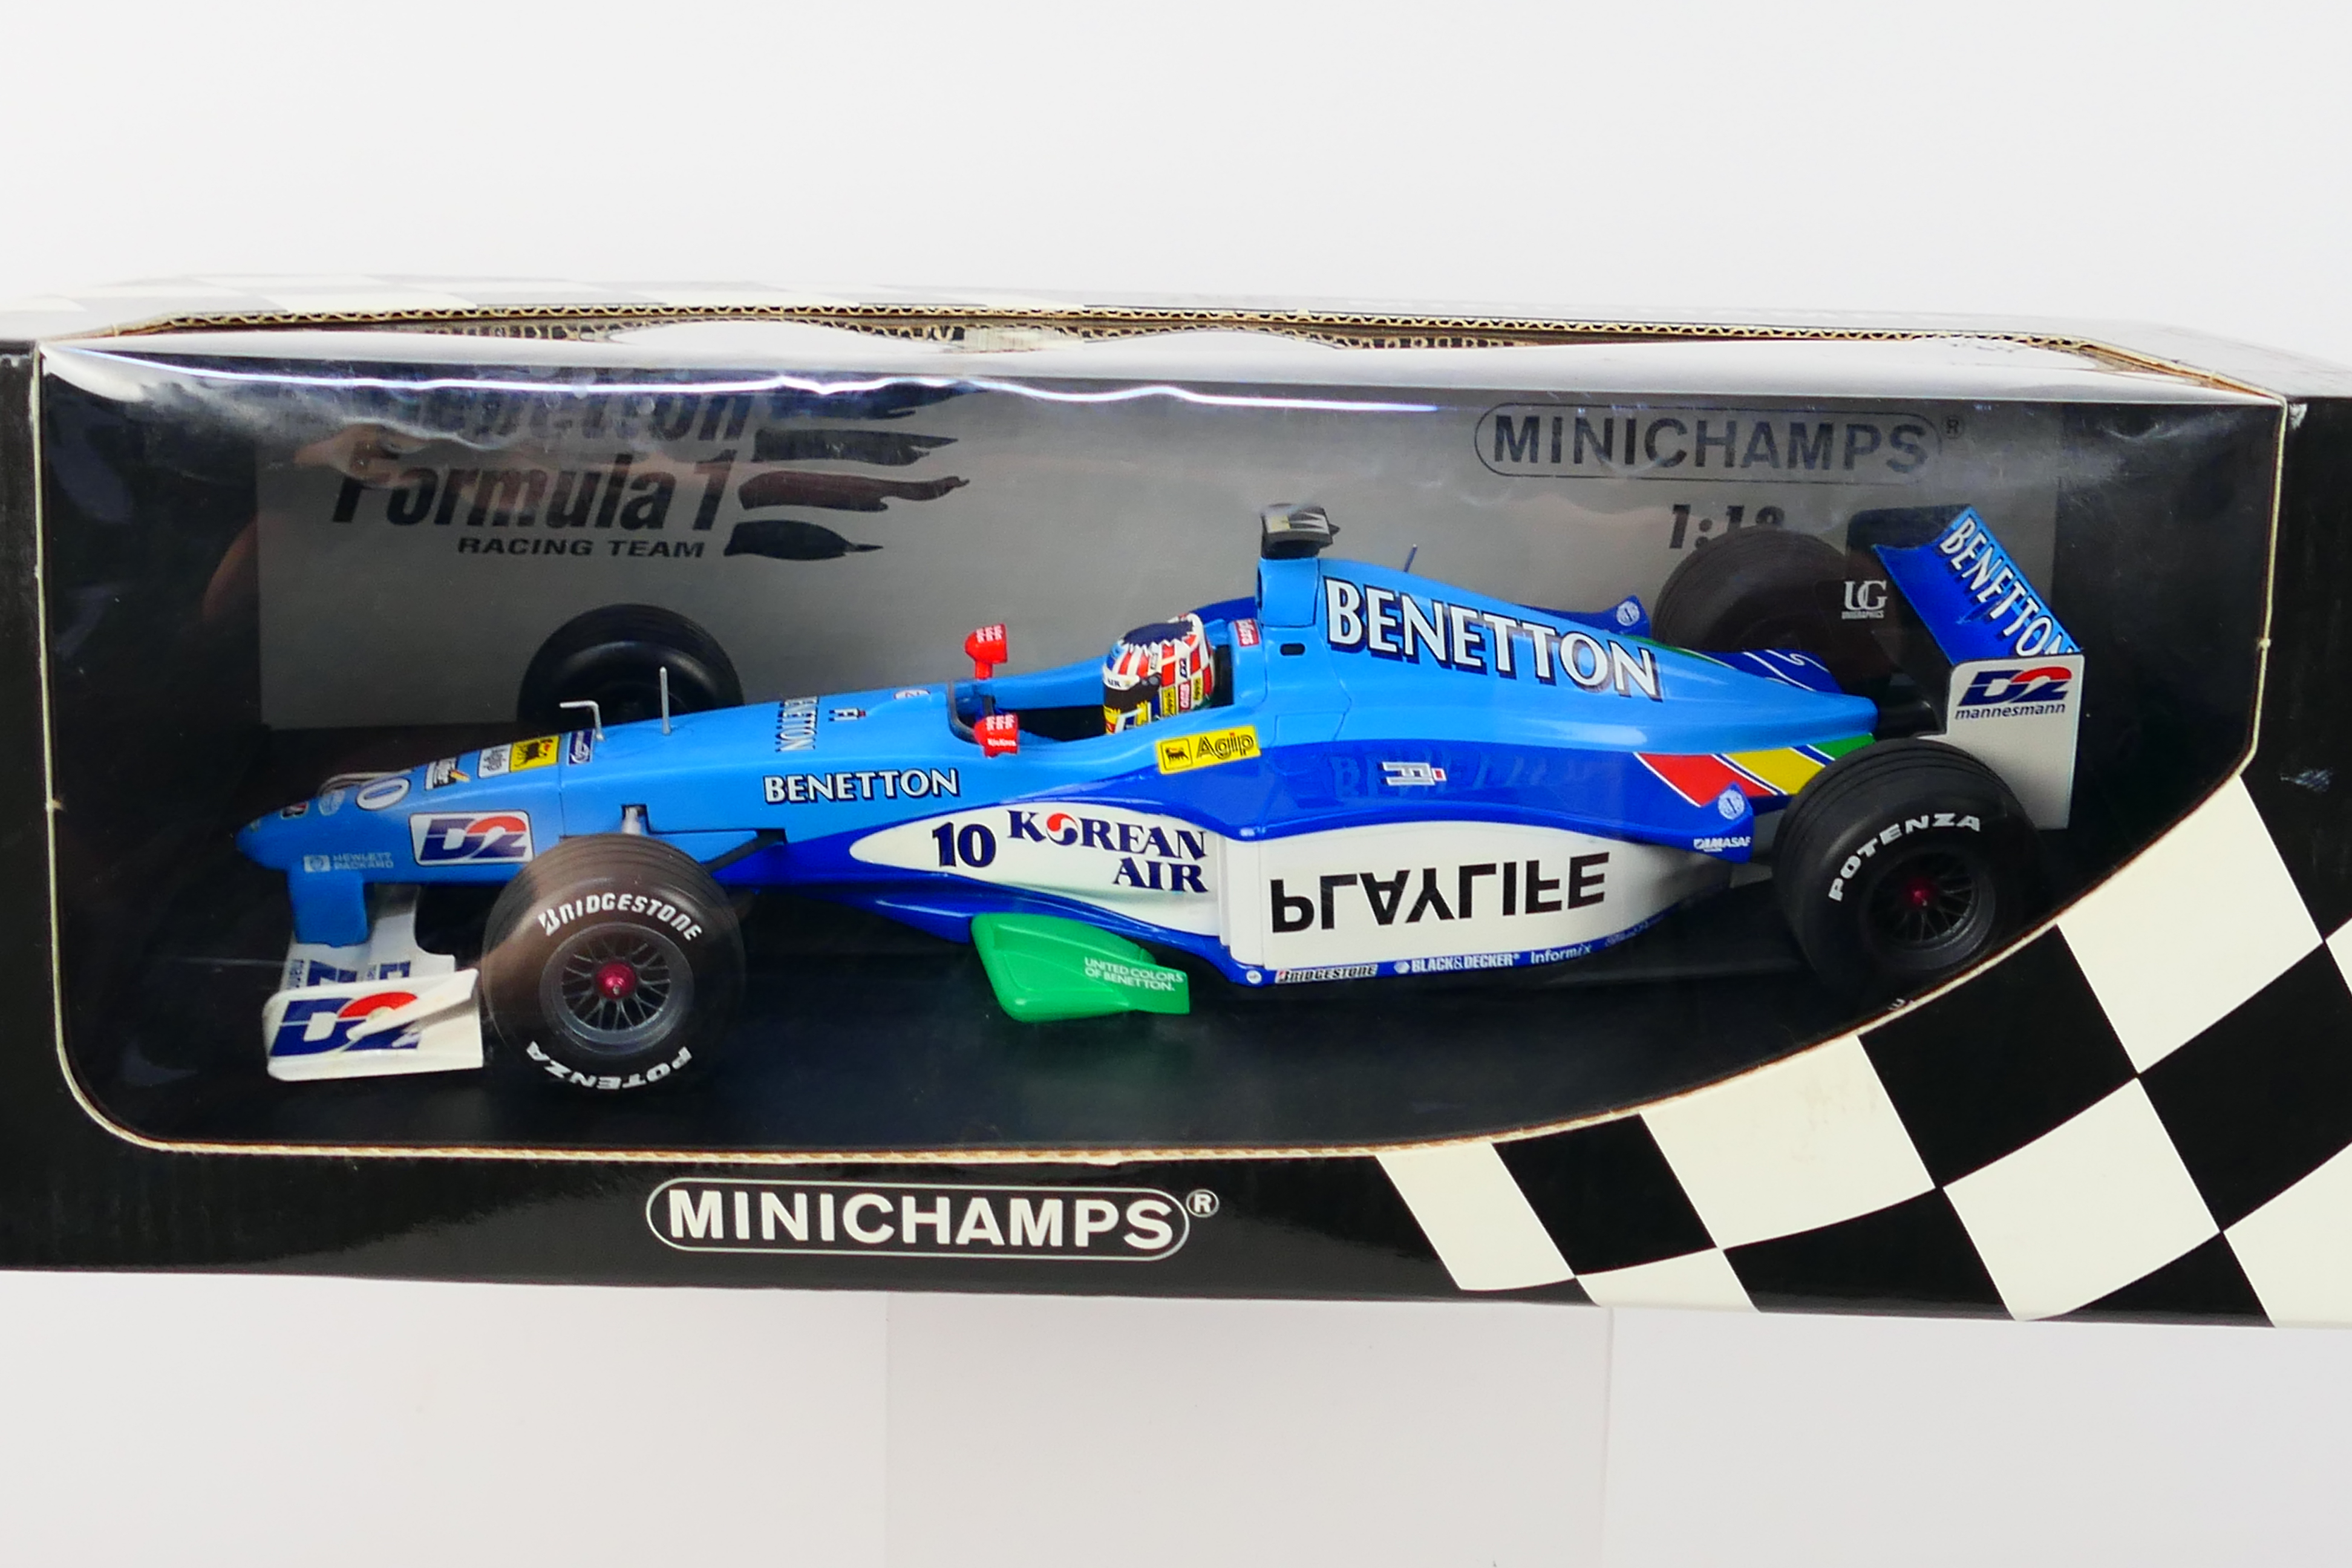 Minichamps- A boxed 1:18 scale Benetton Formula 1 Playlife B199 Alexander Wurz 1999 car which - Image 2 of 3